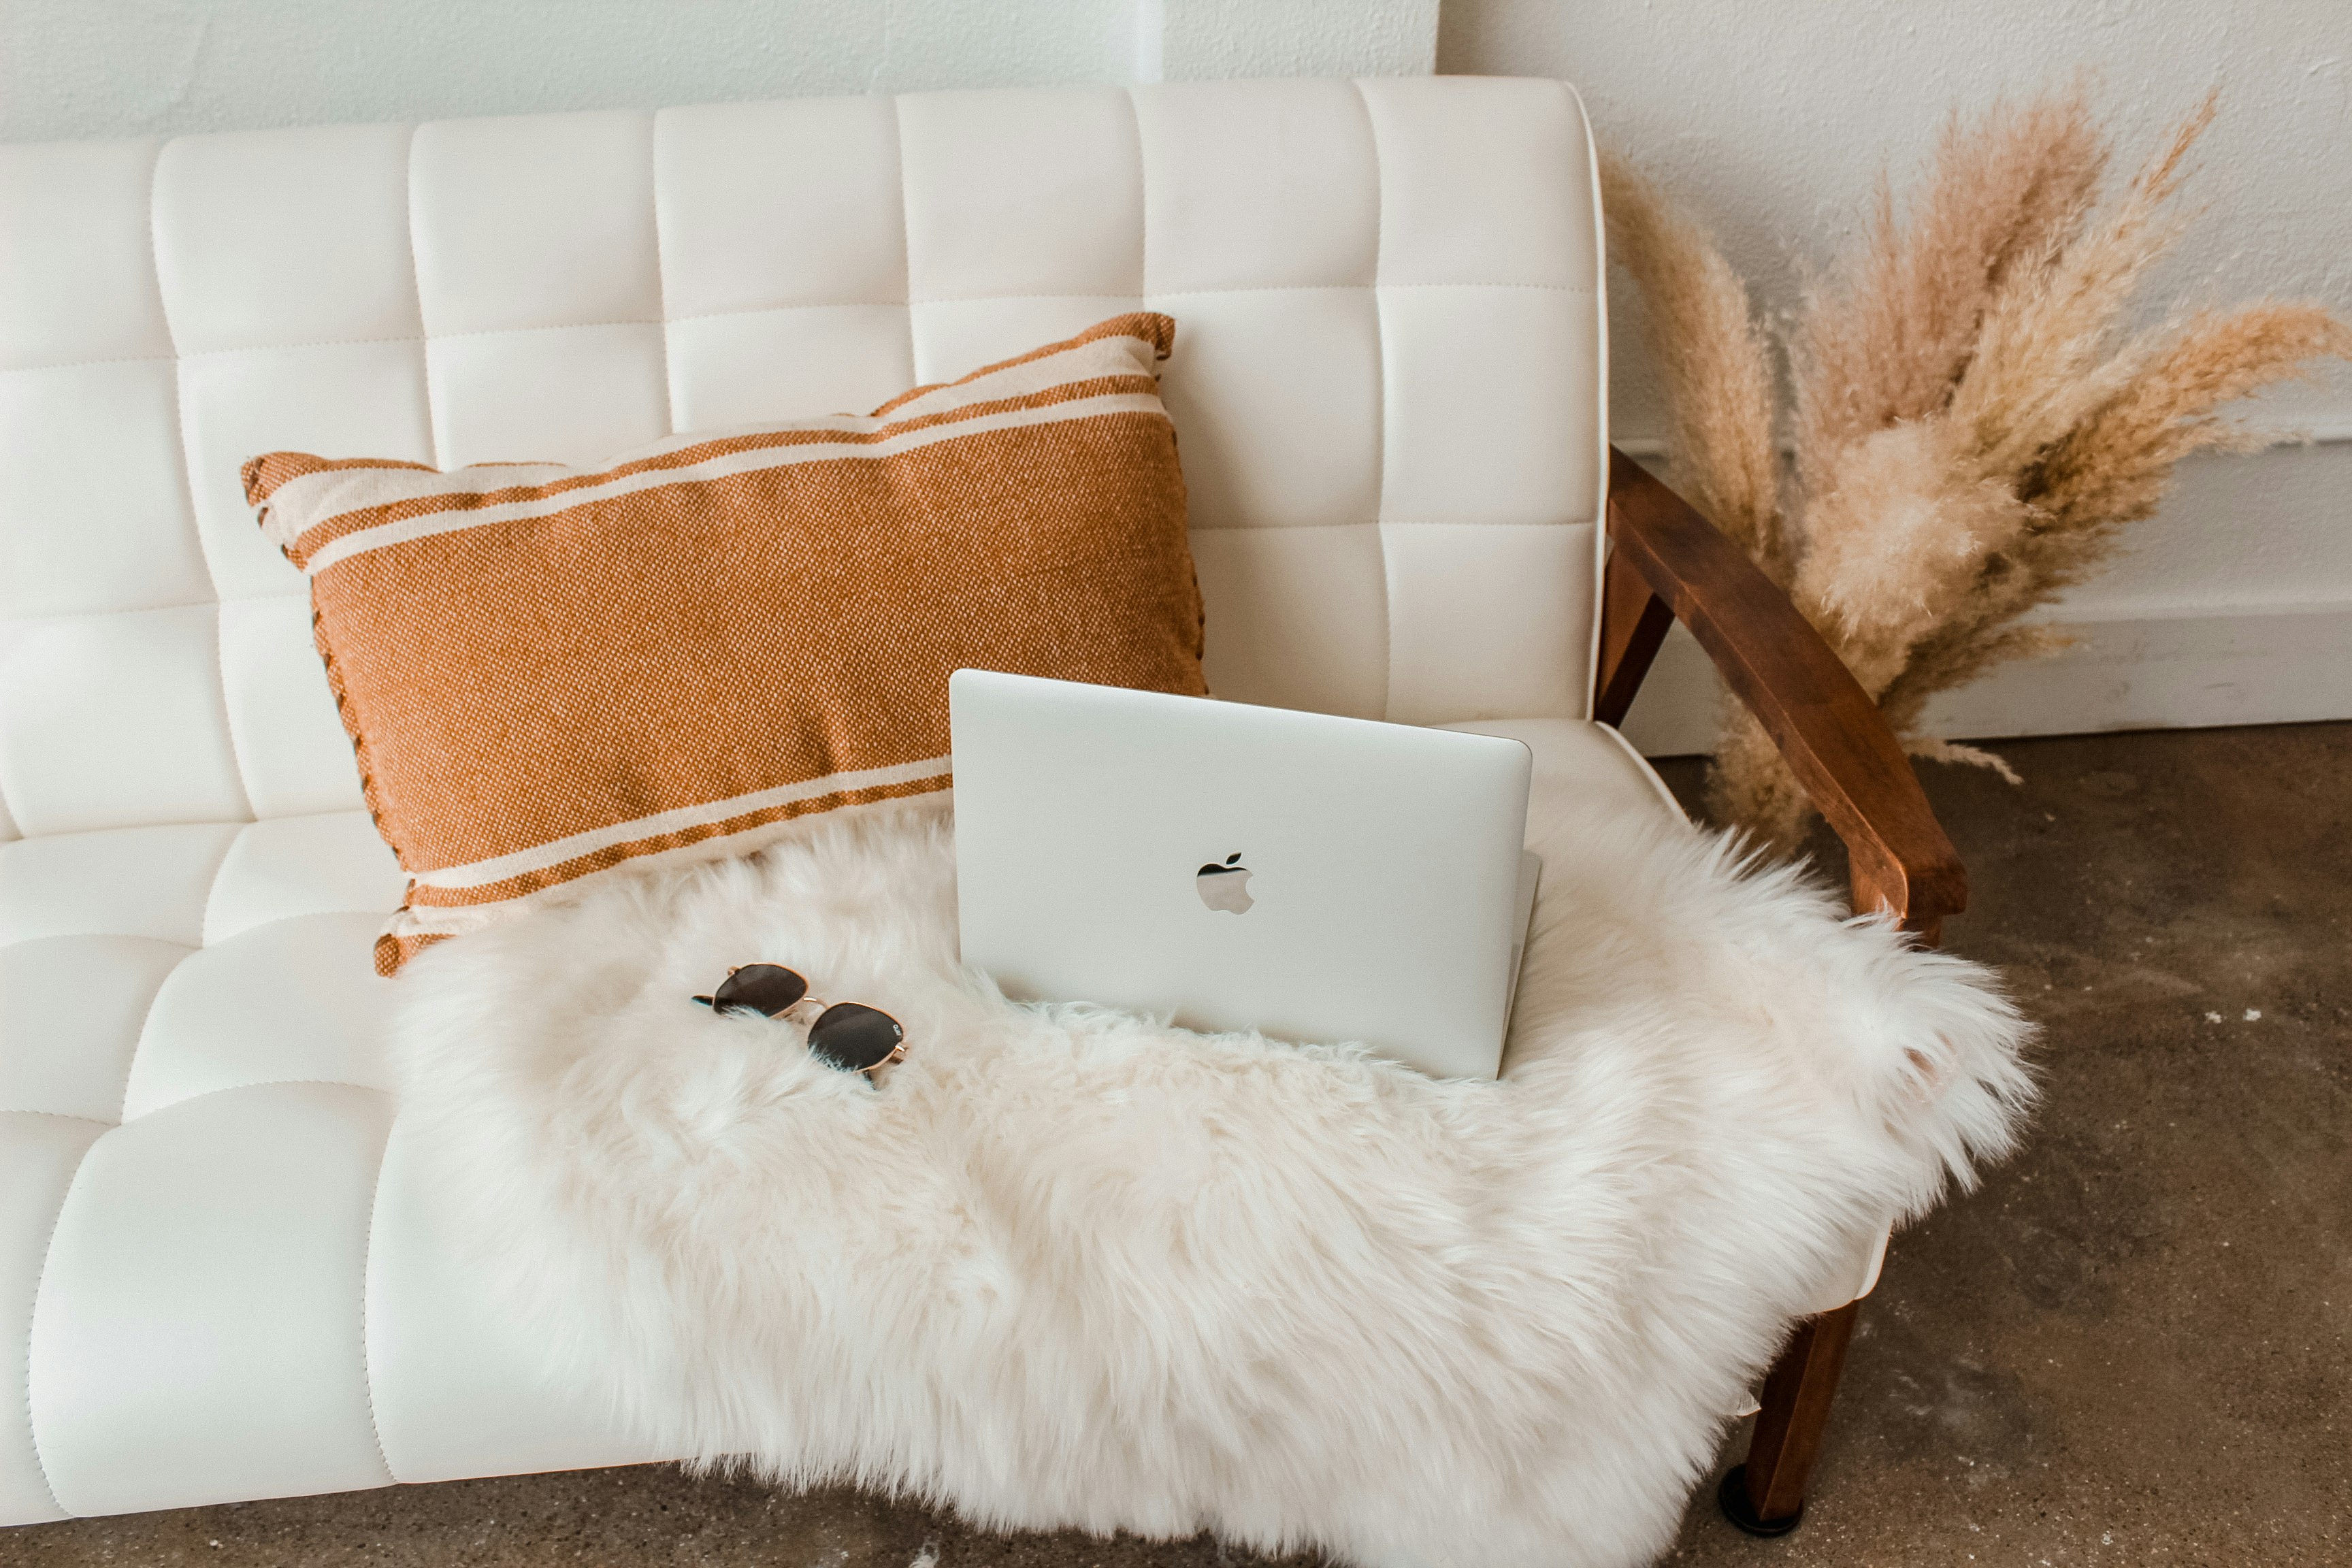 Laptop on loveseat with pampas grass